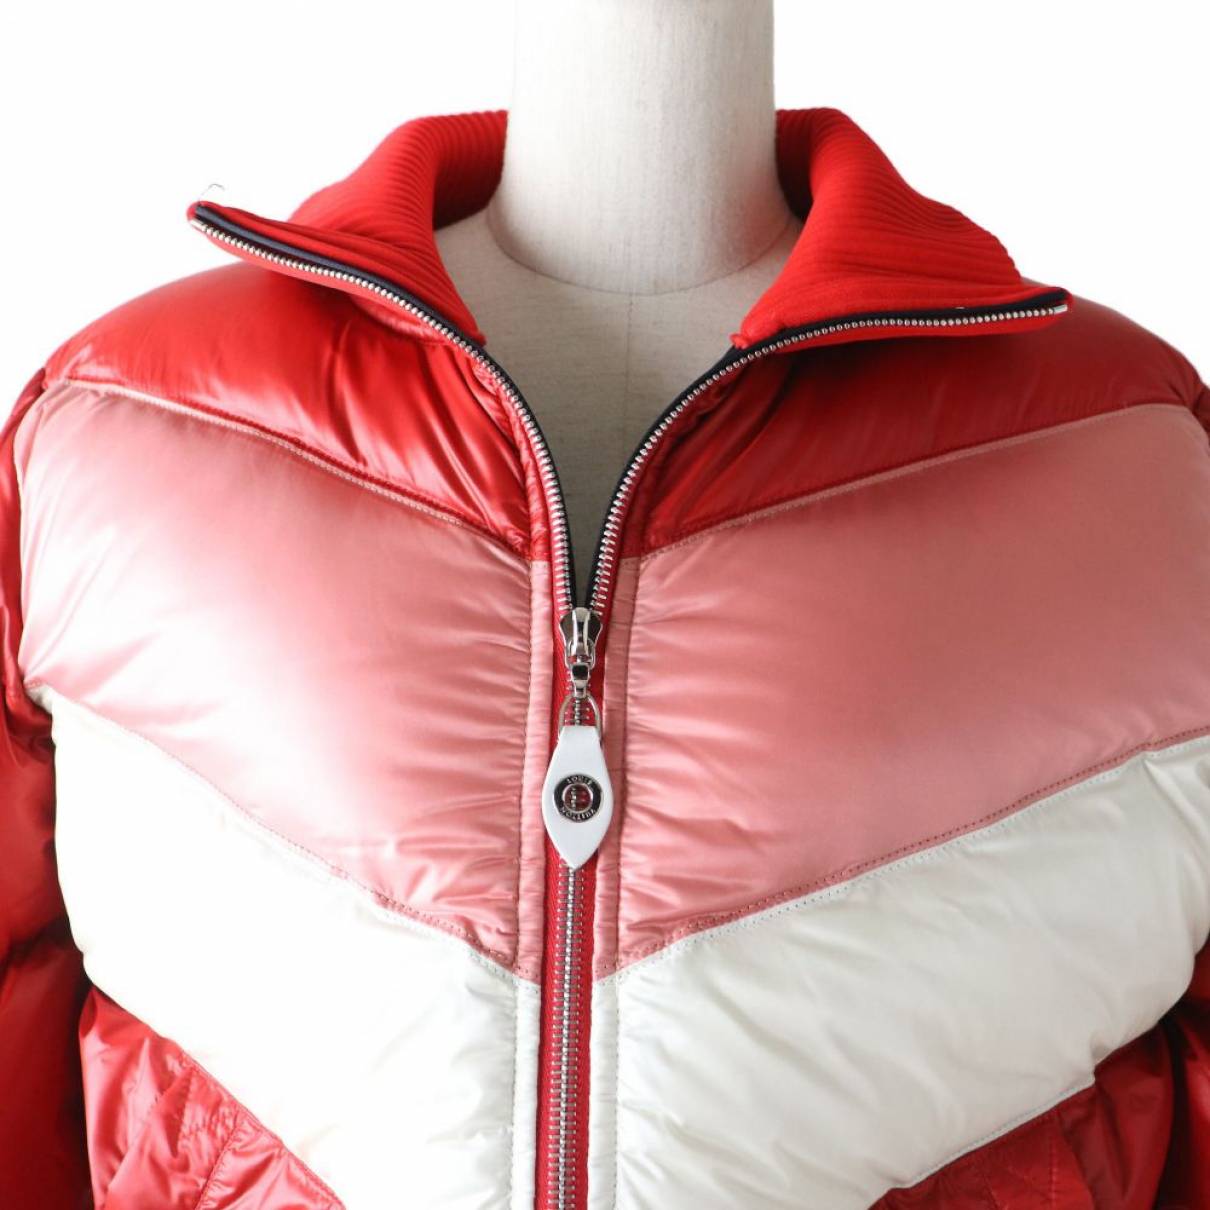 lv red and white jacket